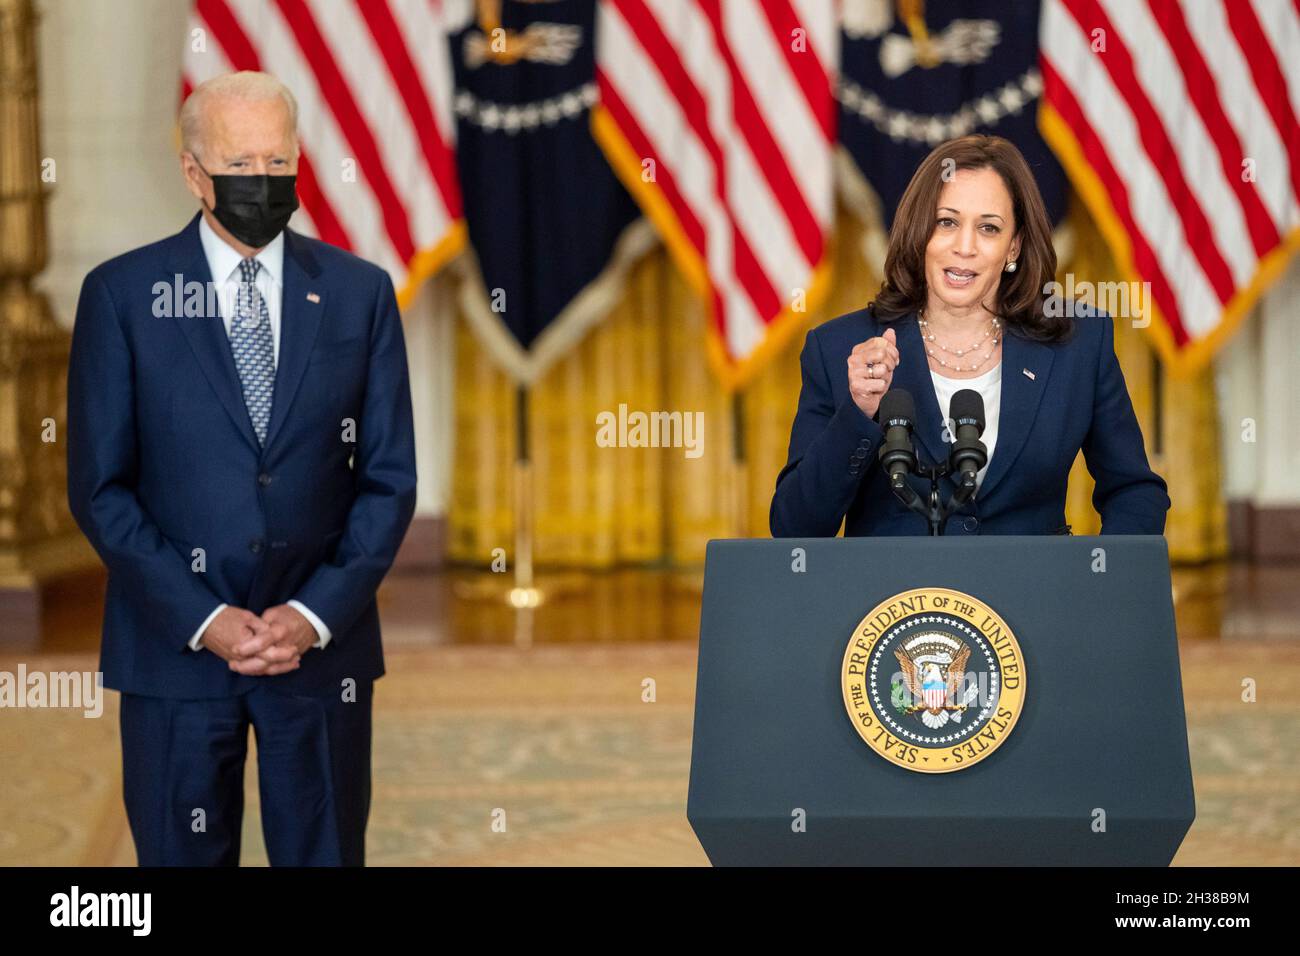 Washington, United States of America. 10 August, 2021. U.S President Joe Biden, looks on as Vice President Kamala Harris, delivers remarks on the passing of the bipartisan Infrastructure Investment and Jobs Act from the East Room of the White House, August 10, 2021 in Washington, D.C.Credit: Adam Schultz/White House Photo/Alamy Live News Stock Photo